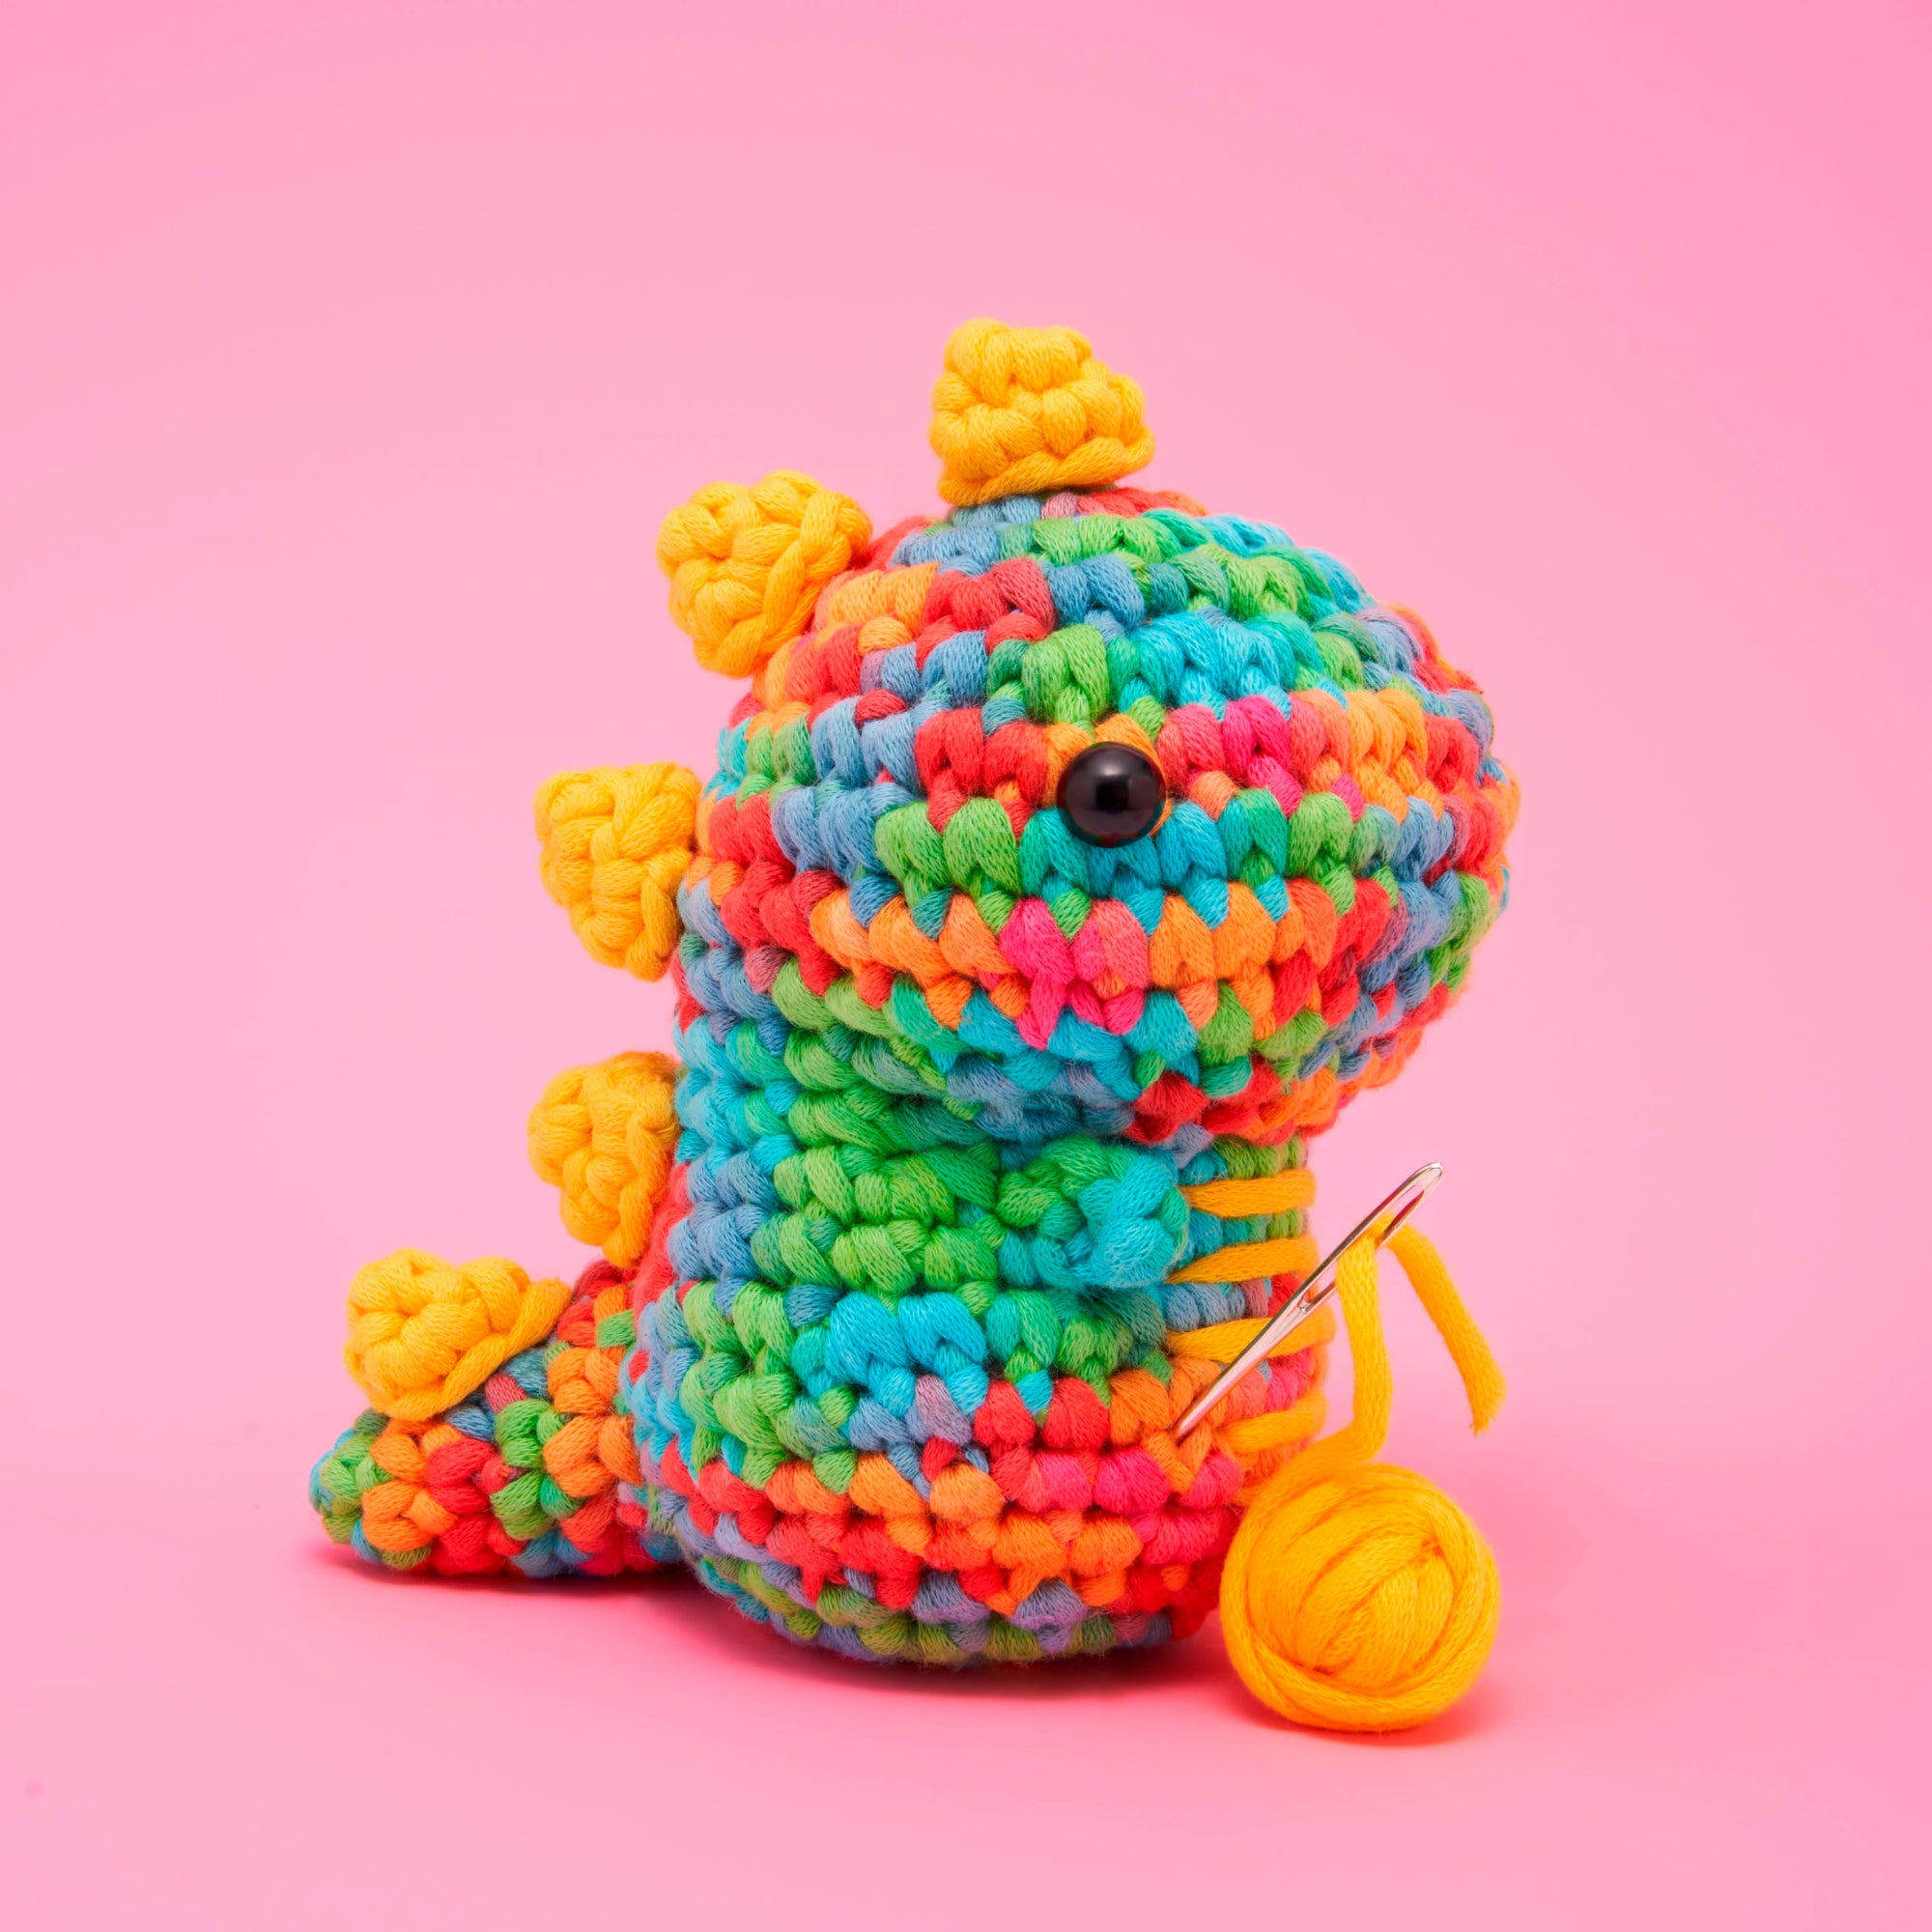 10 Reasons Why The Woobles Crochet Kits Are So Awesome - Stardust